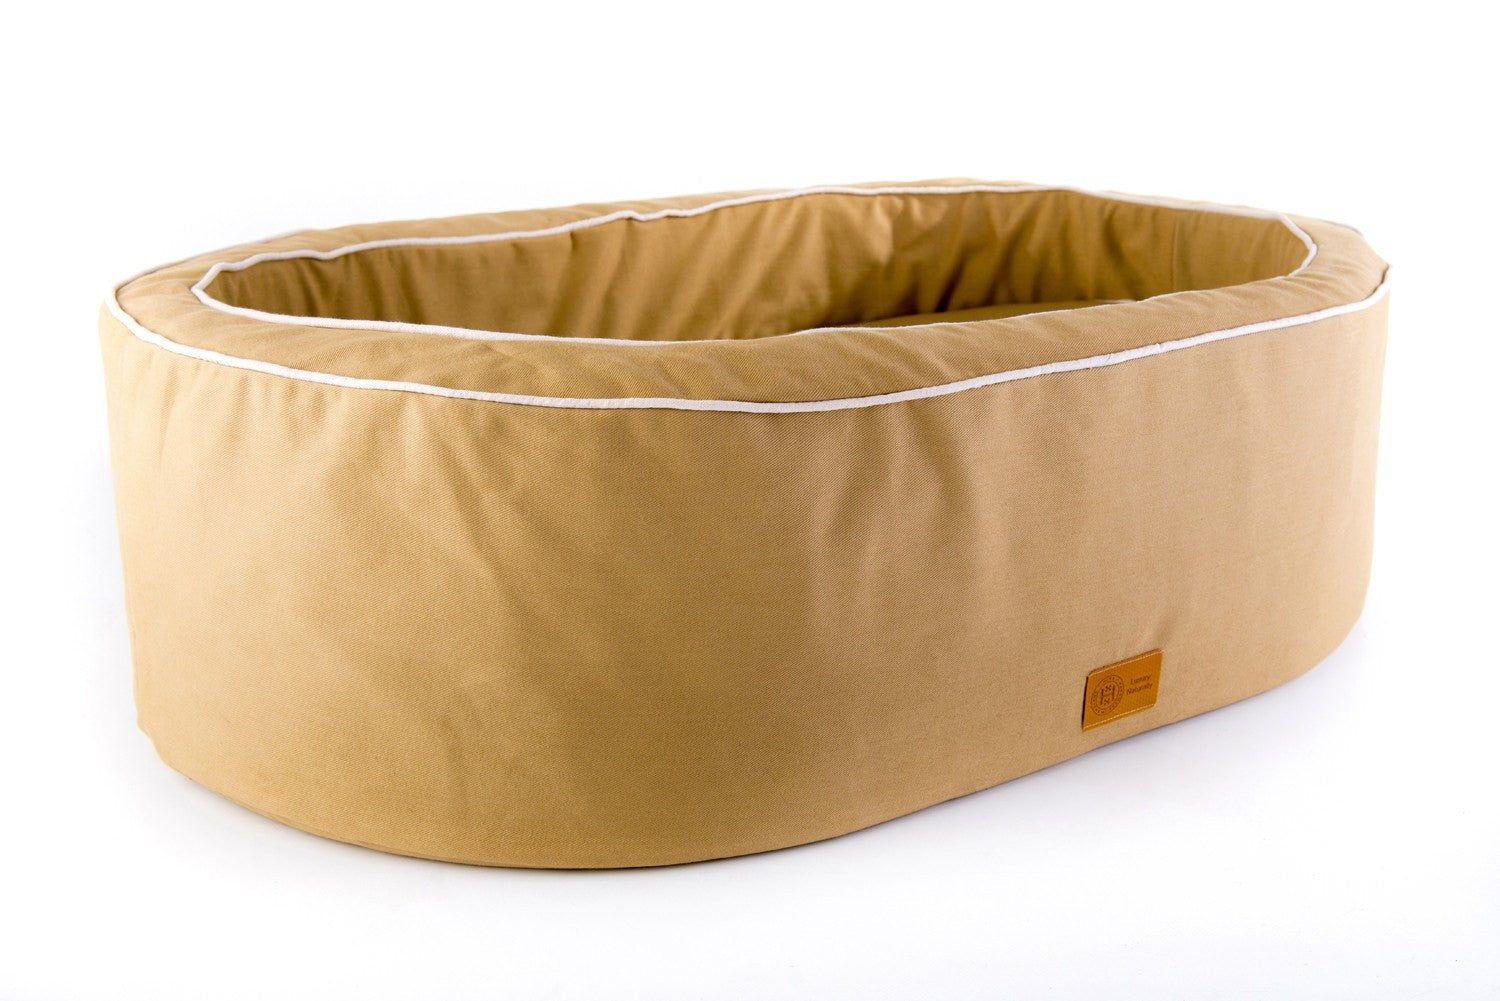 Sand and cream bull denim cotton natural Nest dog bed from organic British lambs wool and materials. Made in Britain.